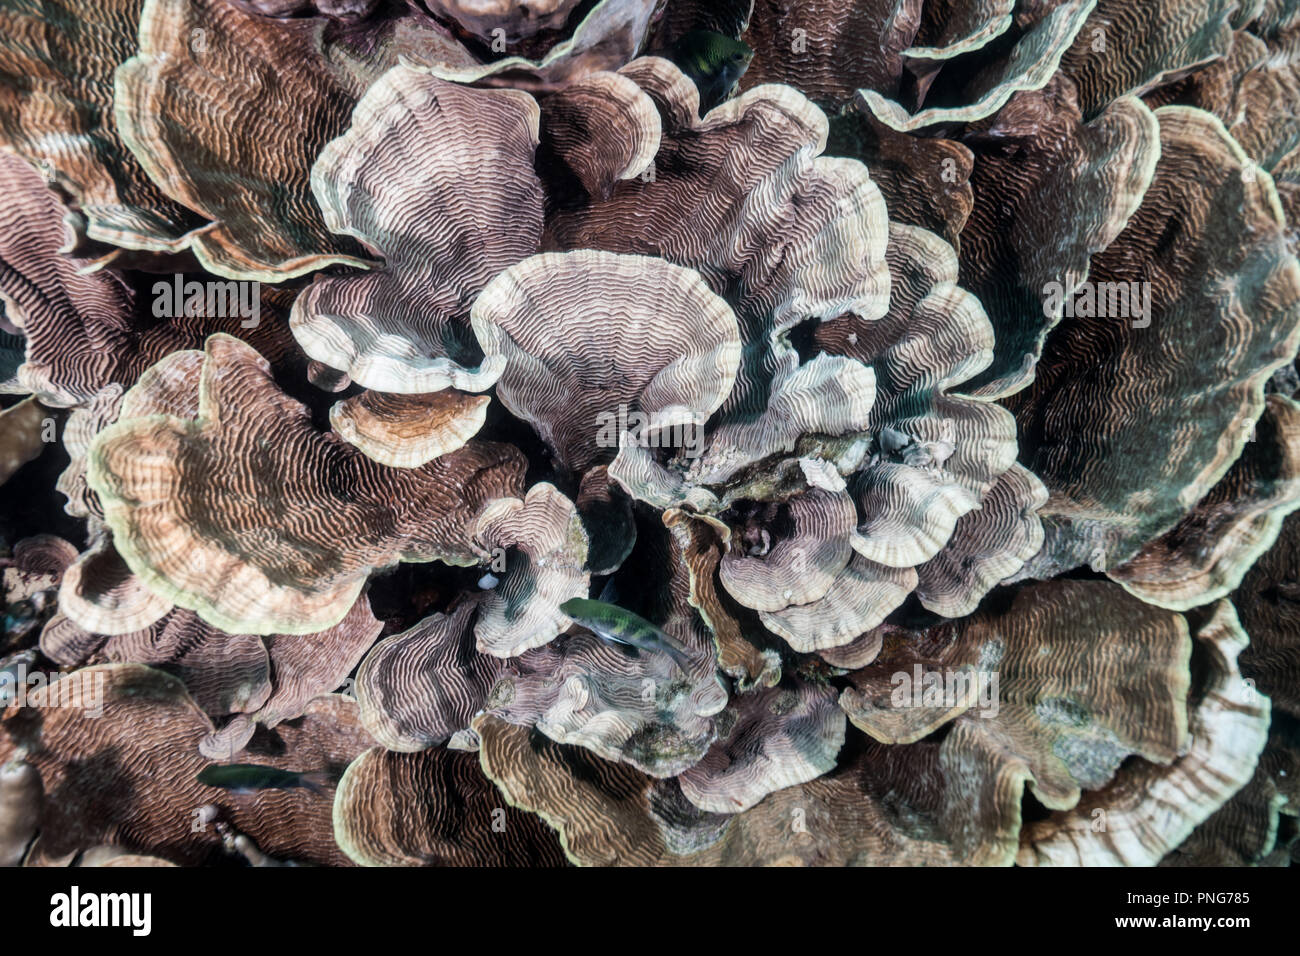 Very shallow coral reef covered with cabbage coral (Turbinaria sp.). Yap island Federated States of Micronesia Stock Photo